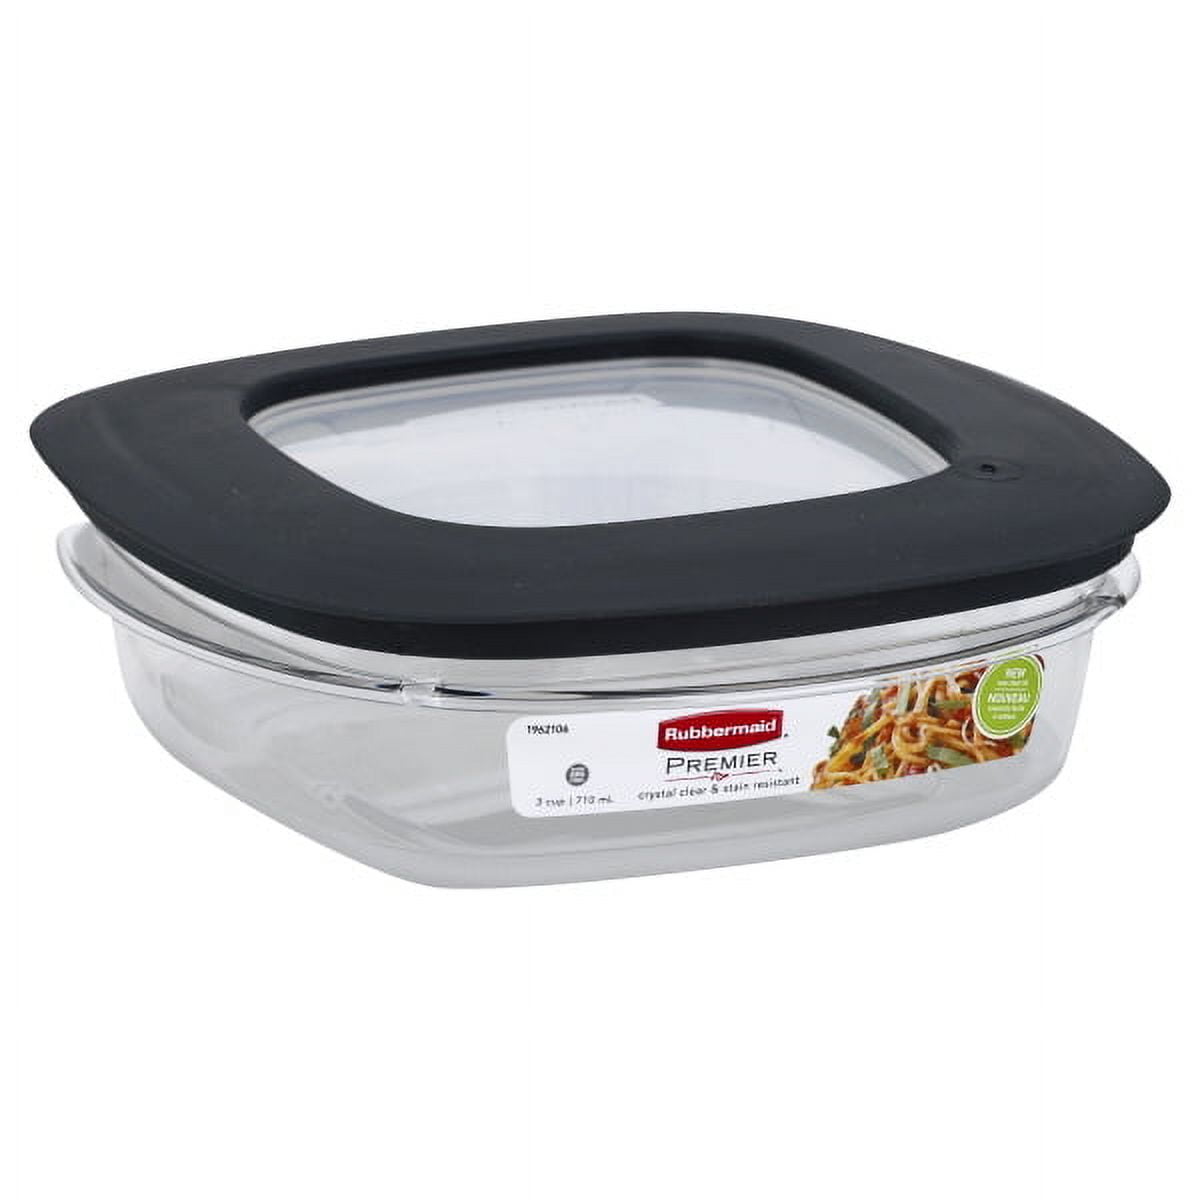 Rubbermaid 1937648 Food Container, 9 Cups Capacity, Plast